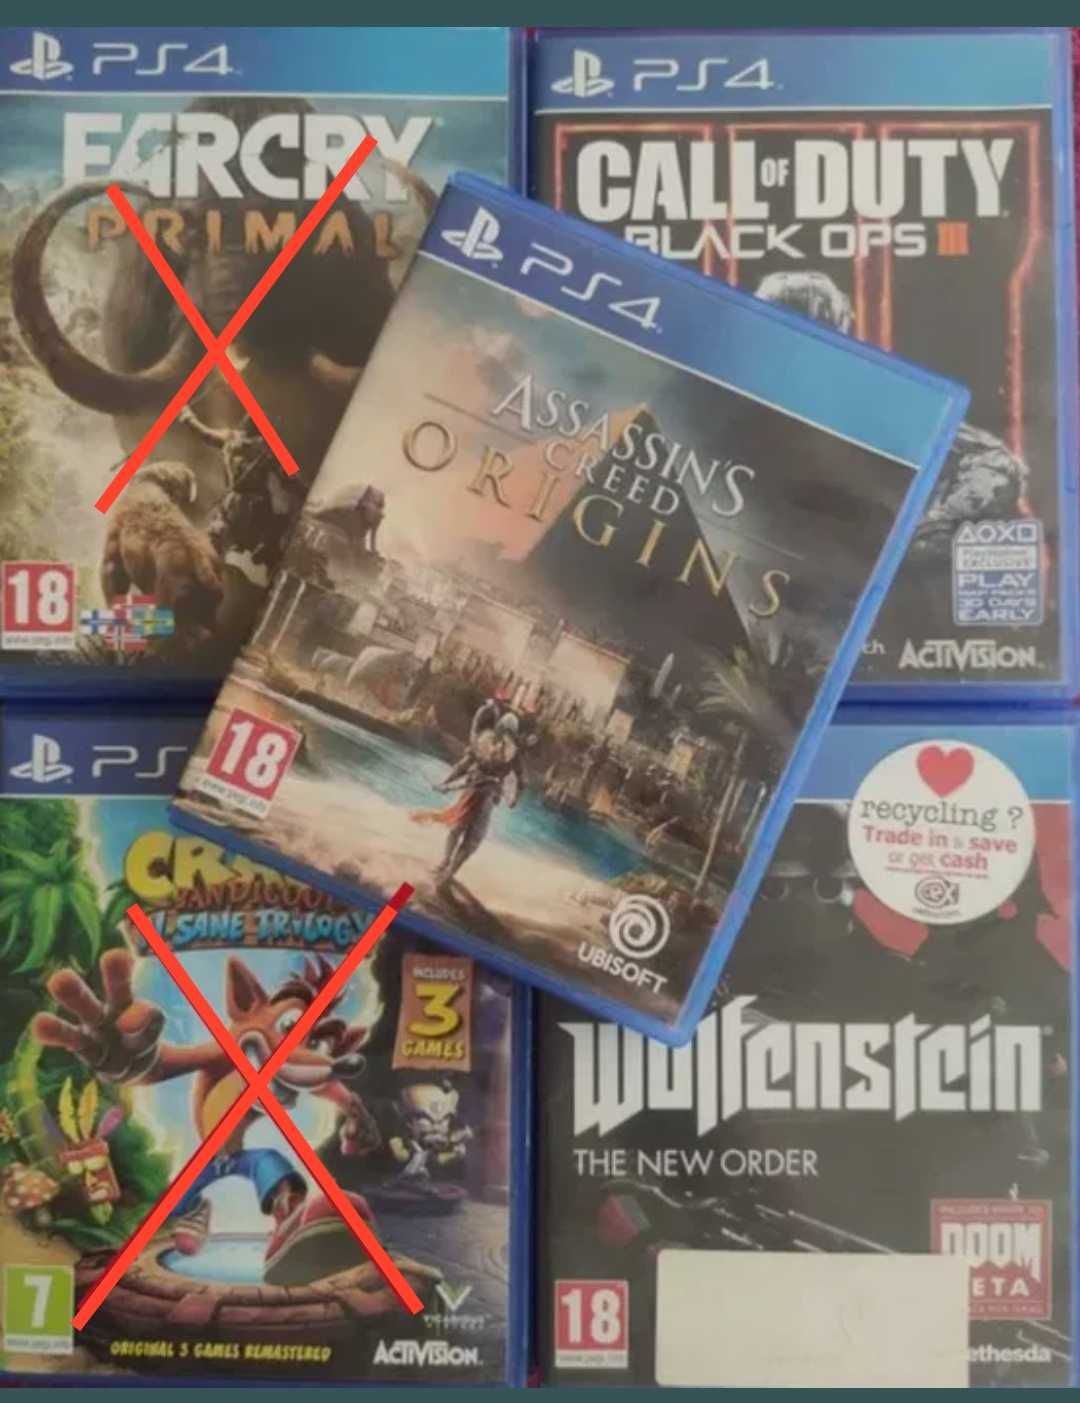 4 бр. PS4 playstation игри - Assassin creed, Call of Duty, Wolfenstein